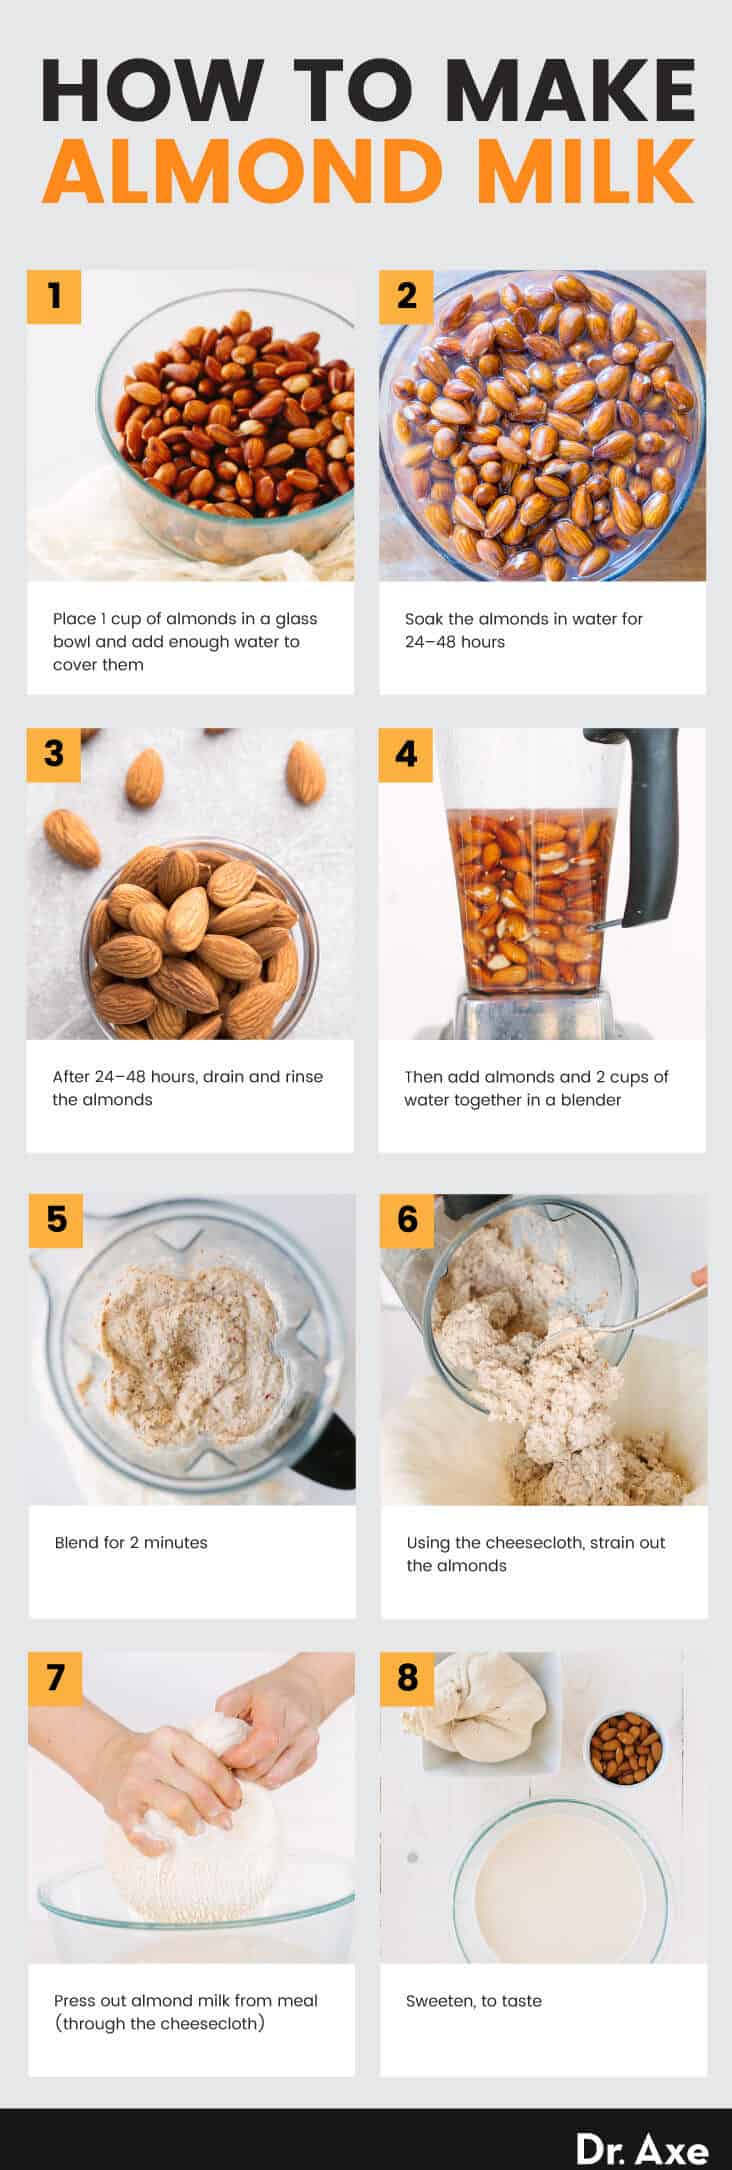 How to make almond milk - Dr. Axe